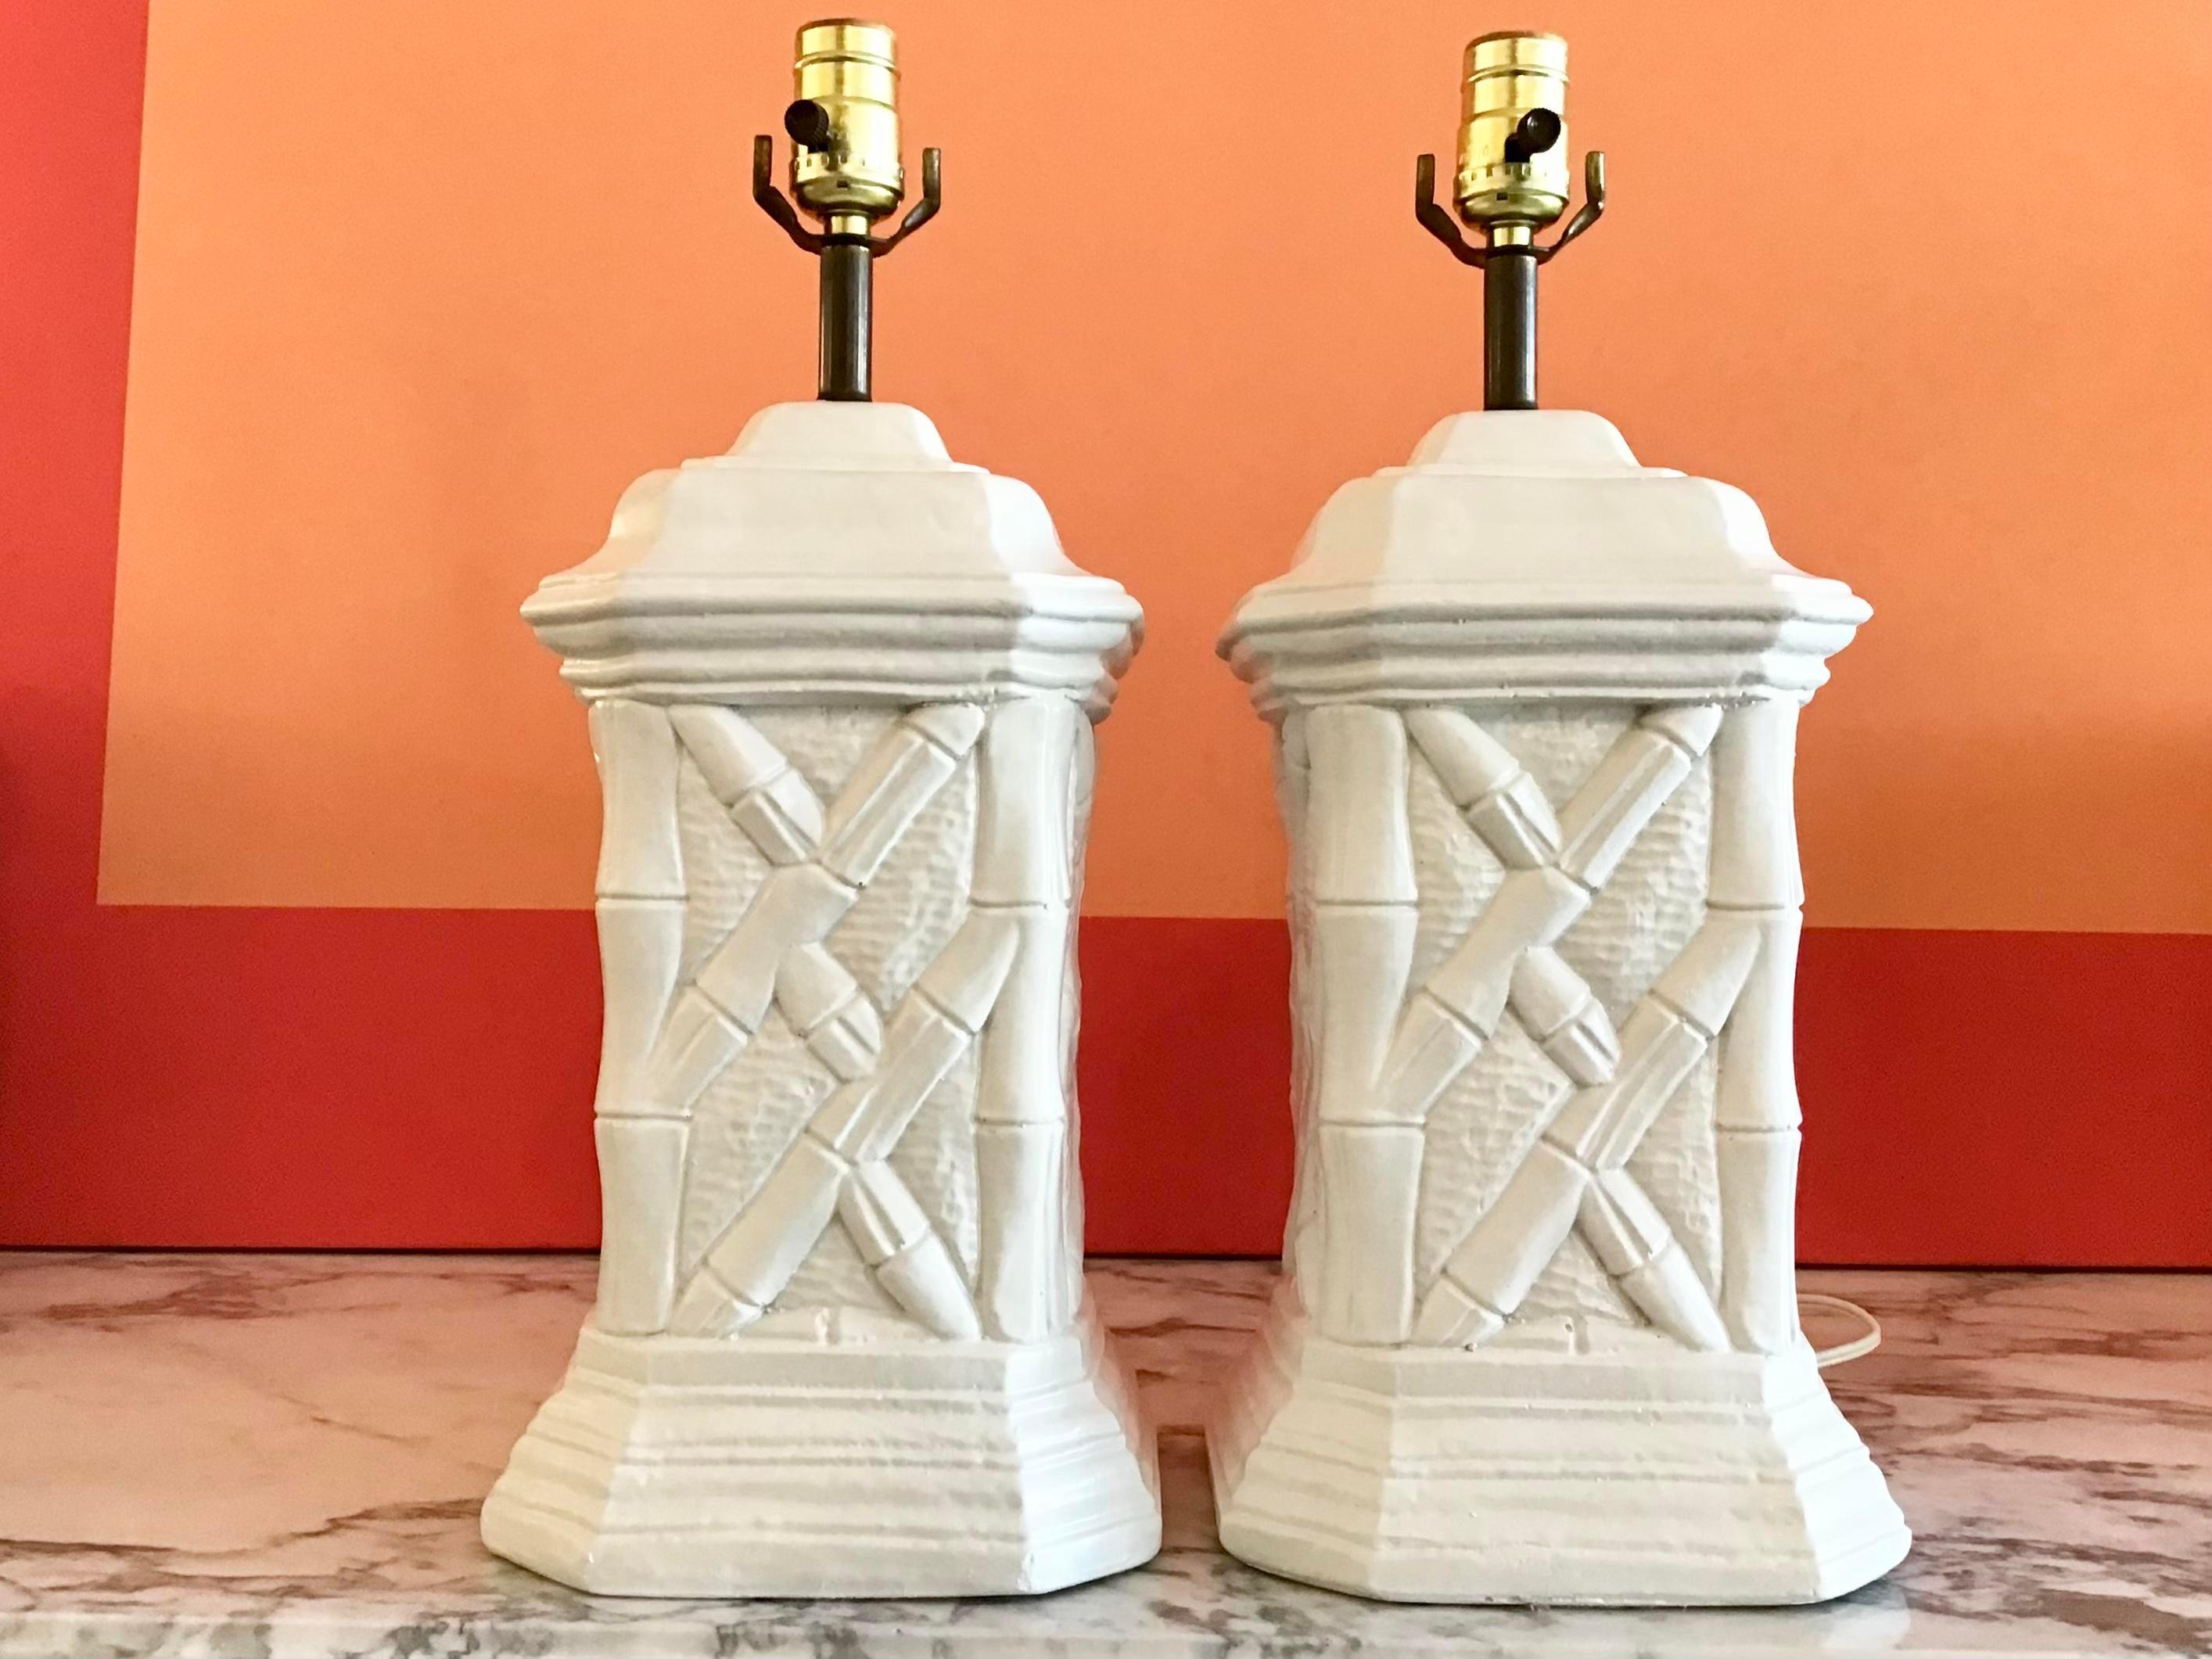 Great fabulous pair of freshly lacquered in white boho chic faux bamboo plaster table lamps. Just add harps, finials, and shades of your choice.